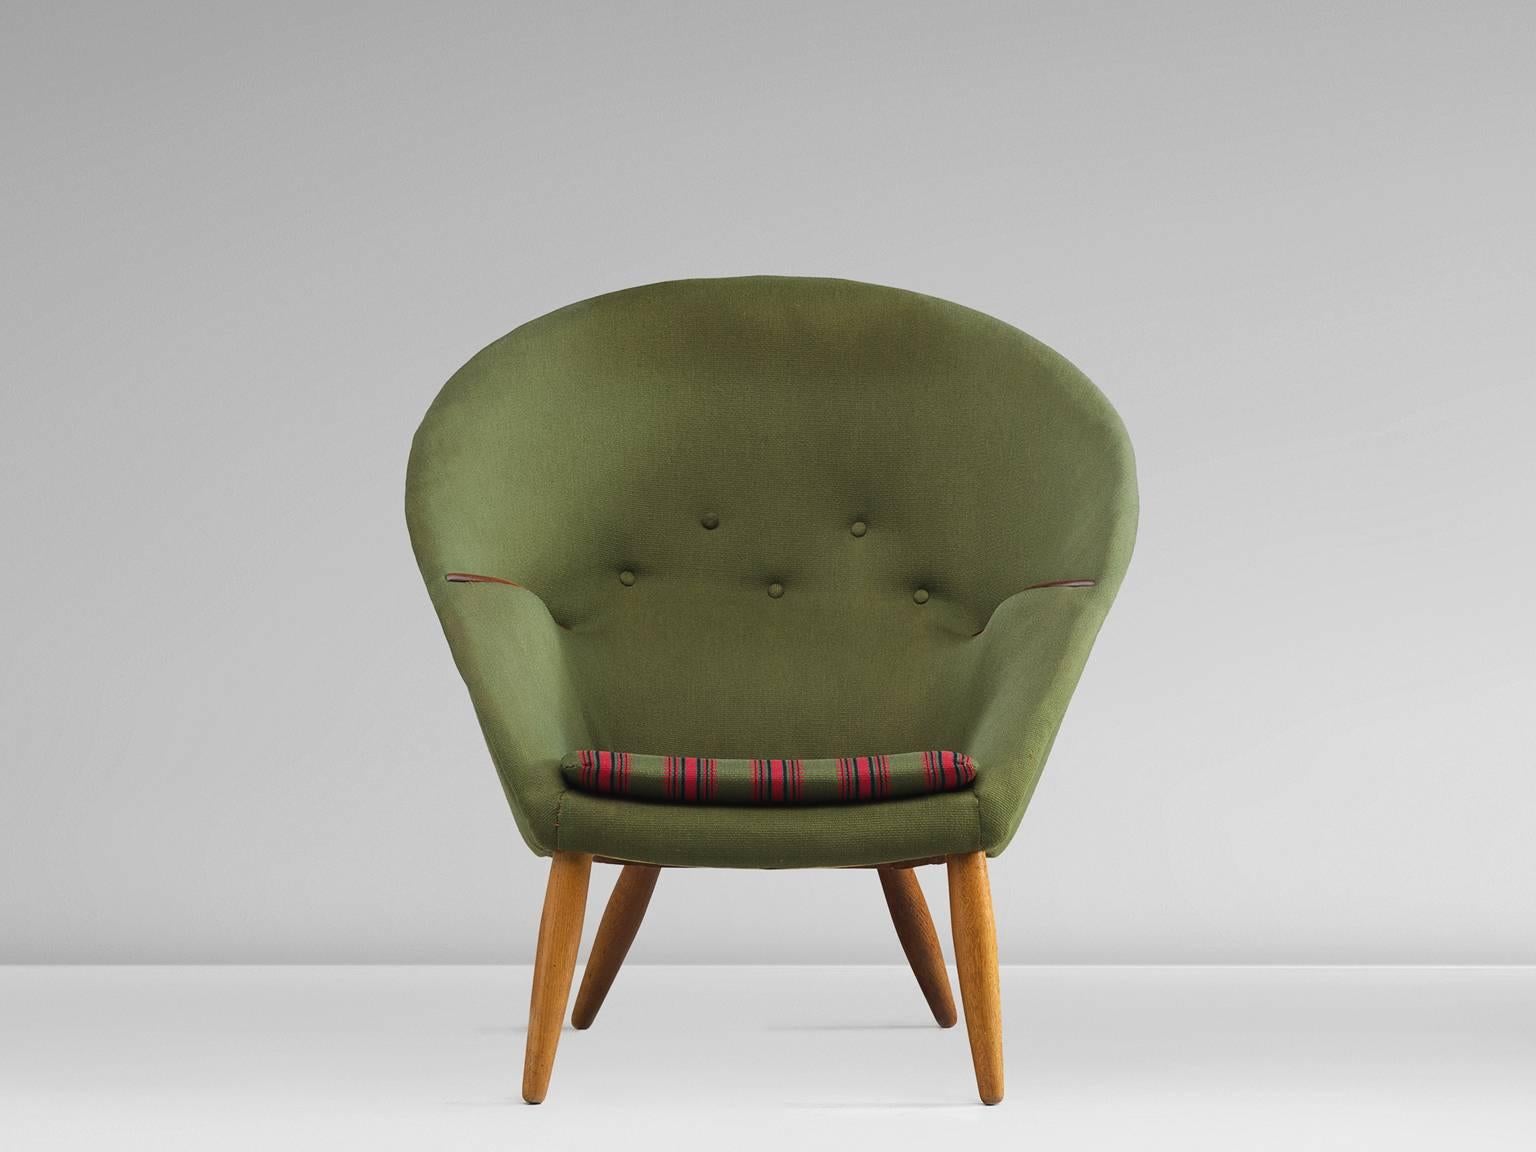 Easy chair, wool and teak, Denmark, 1953.

This round and comfortable armchair is designed by Nanna Ditzel. The chair features four thick legs that become smaller towards the top and bottom. The shell of the seat is round with a flat bottom. The